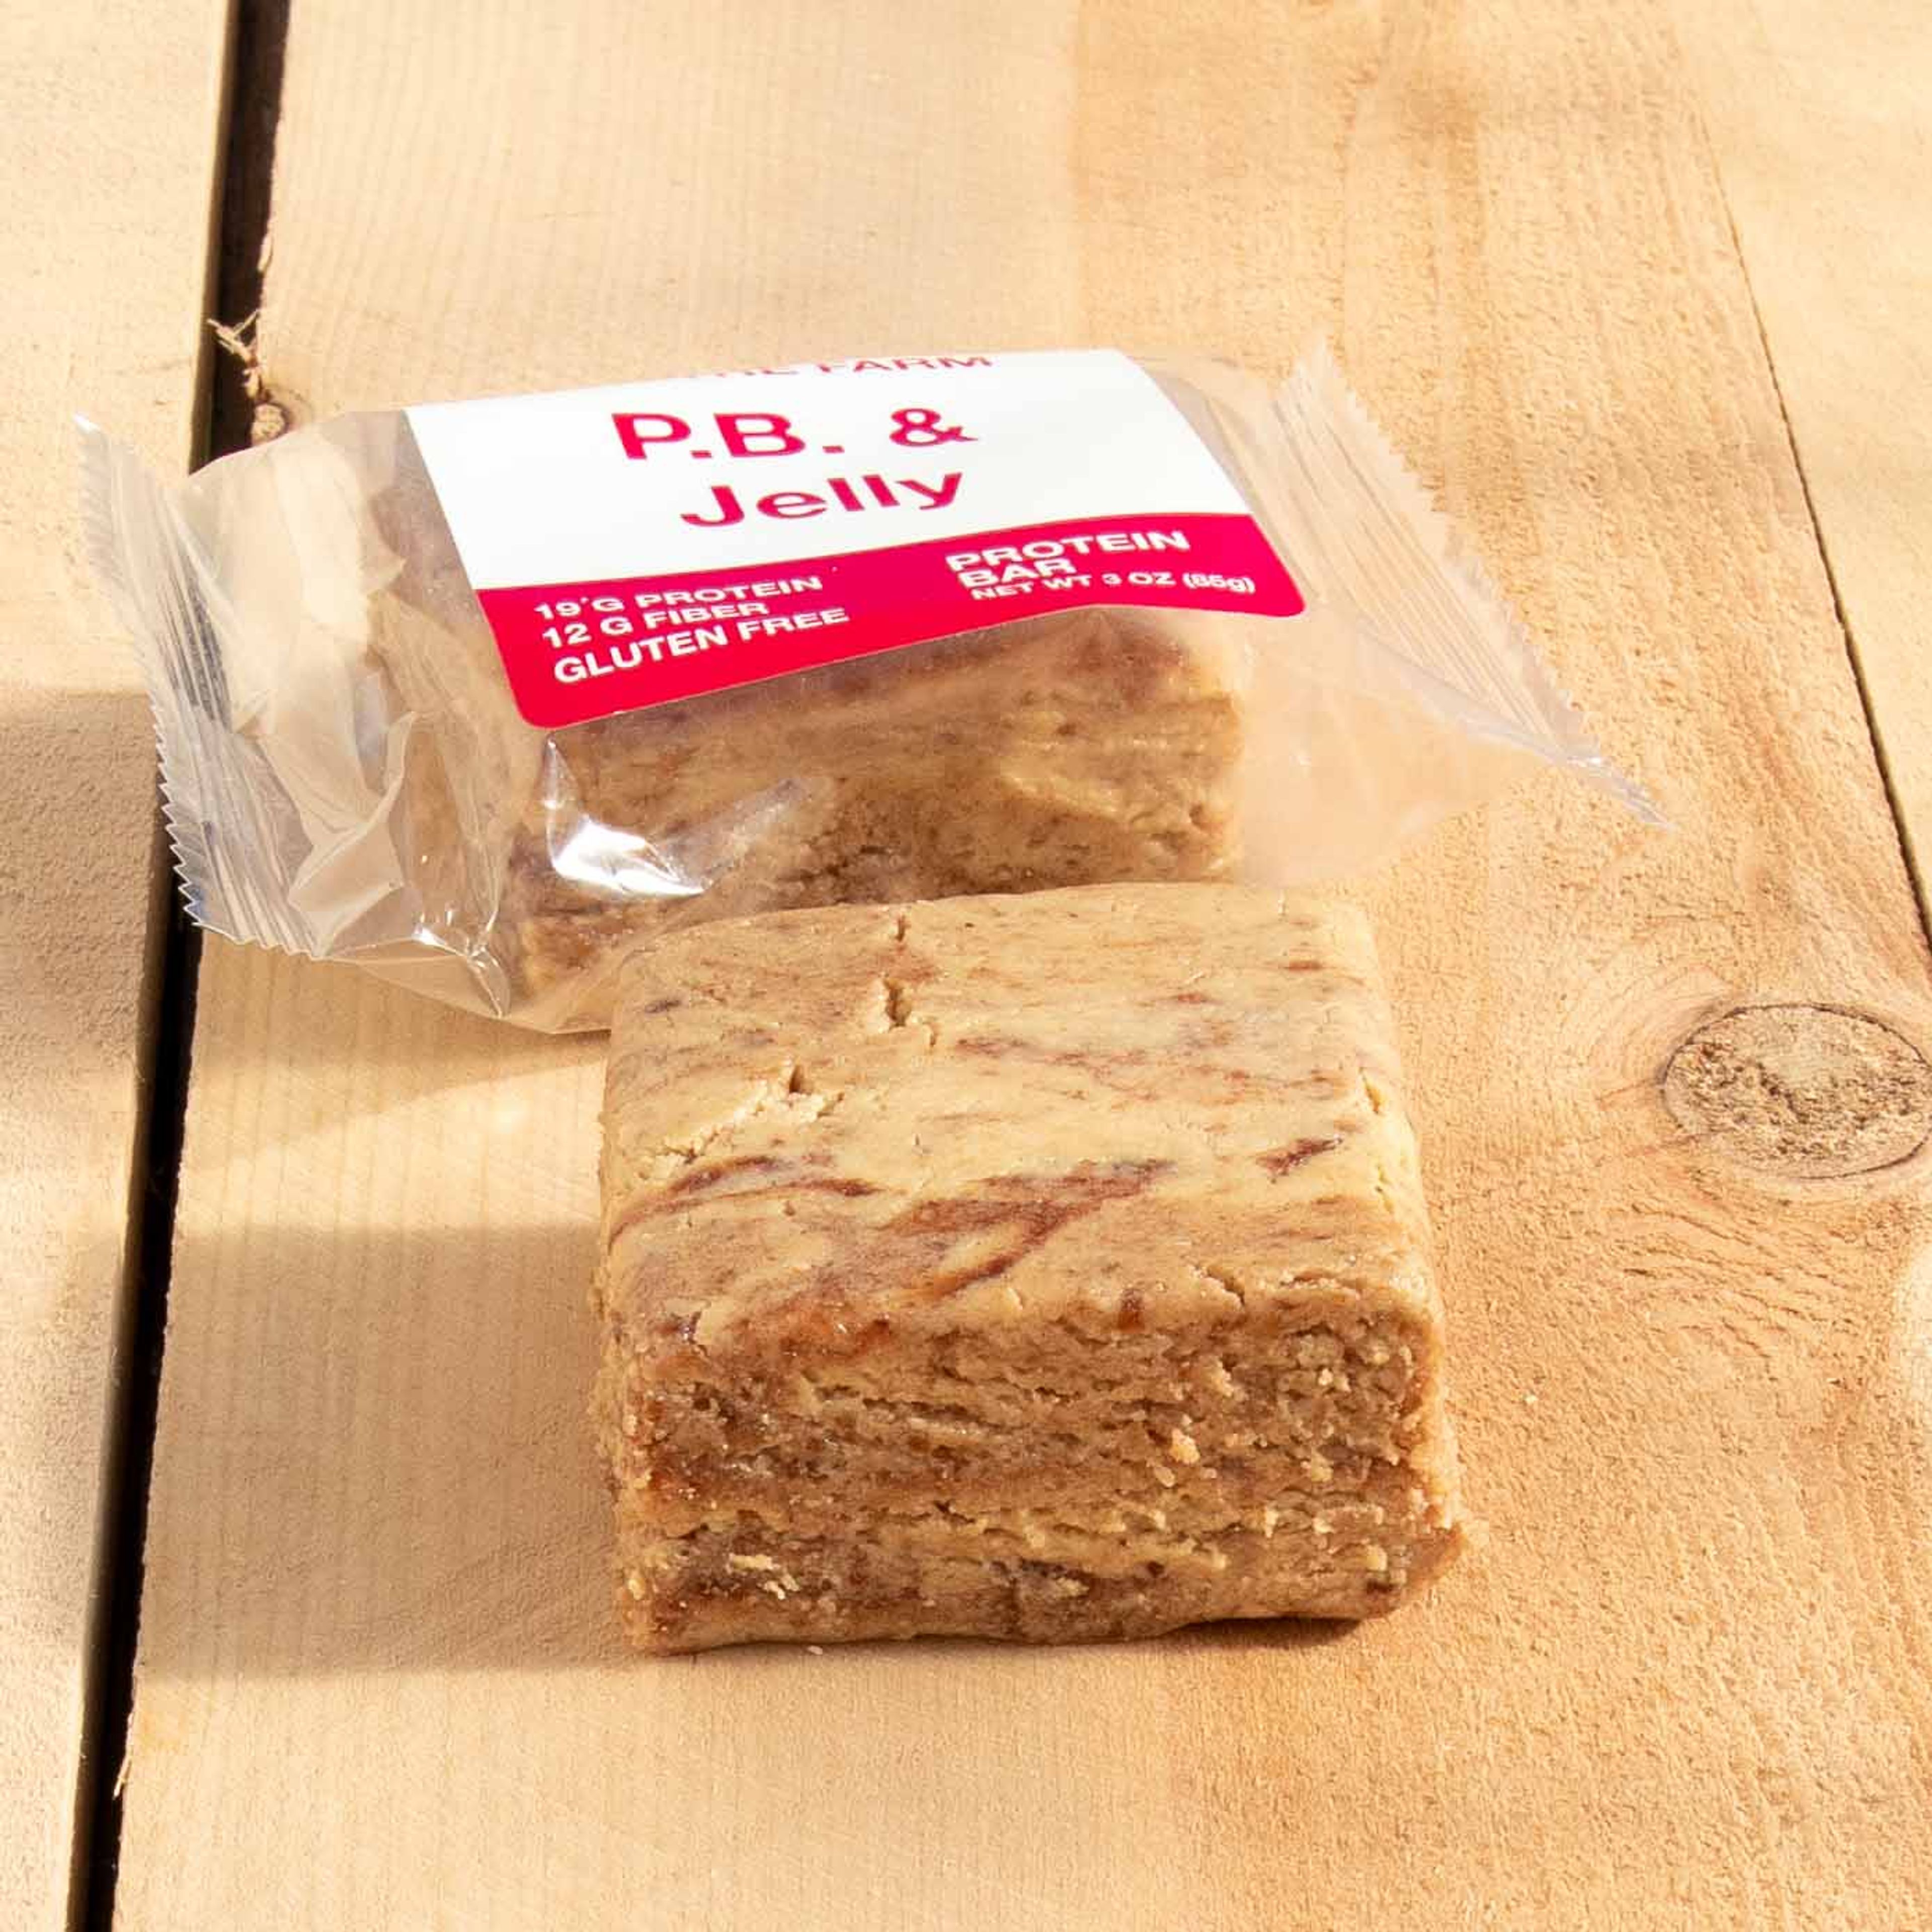 Peanut Butter & Jelly Protein Bar - Box of 12